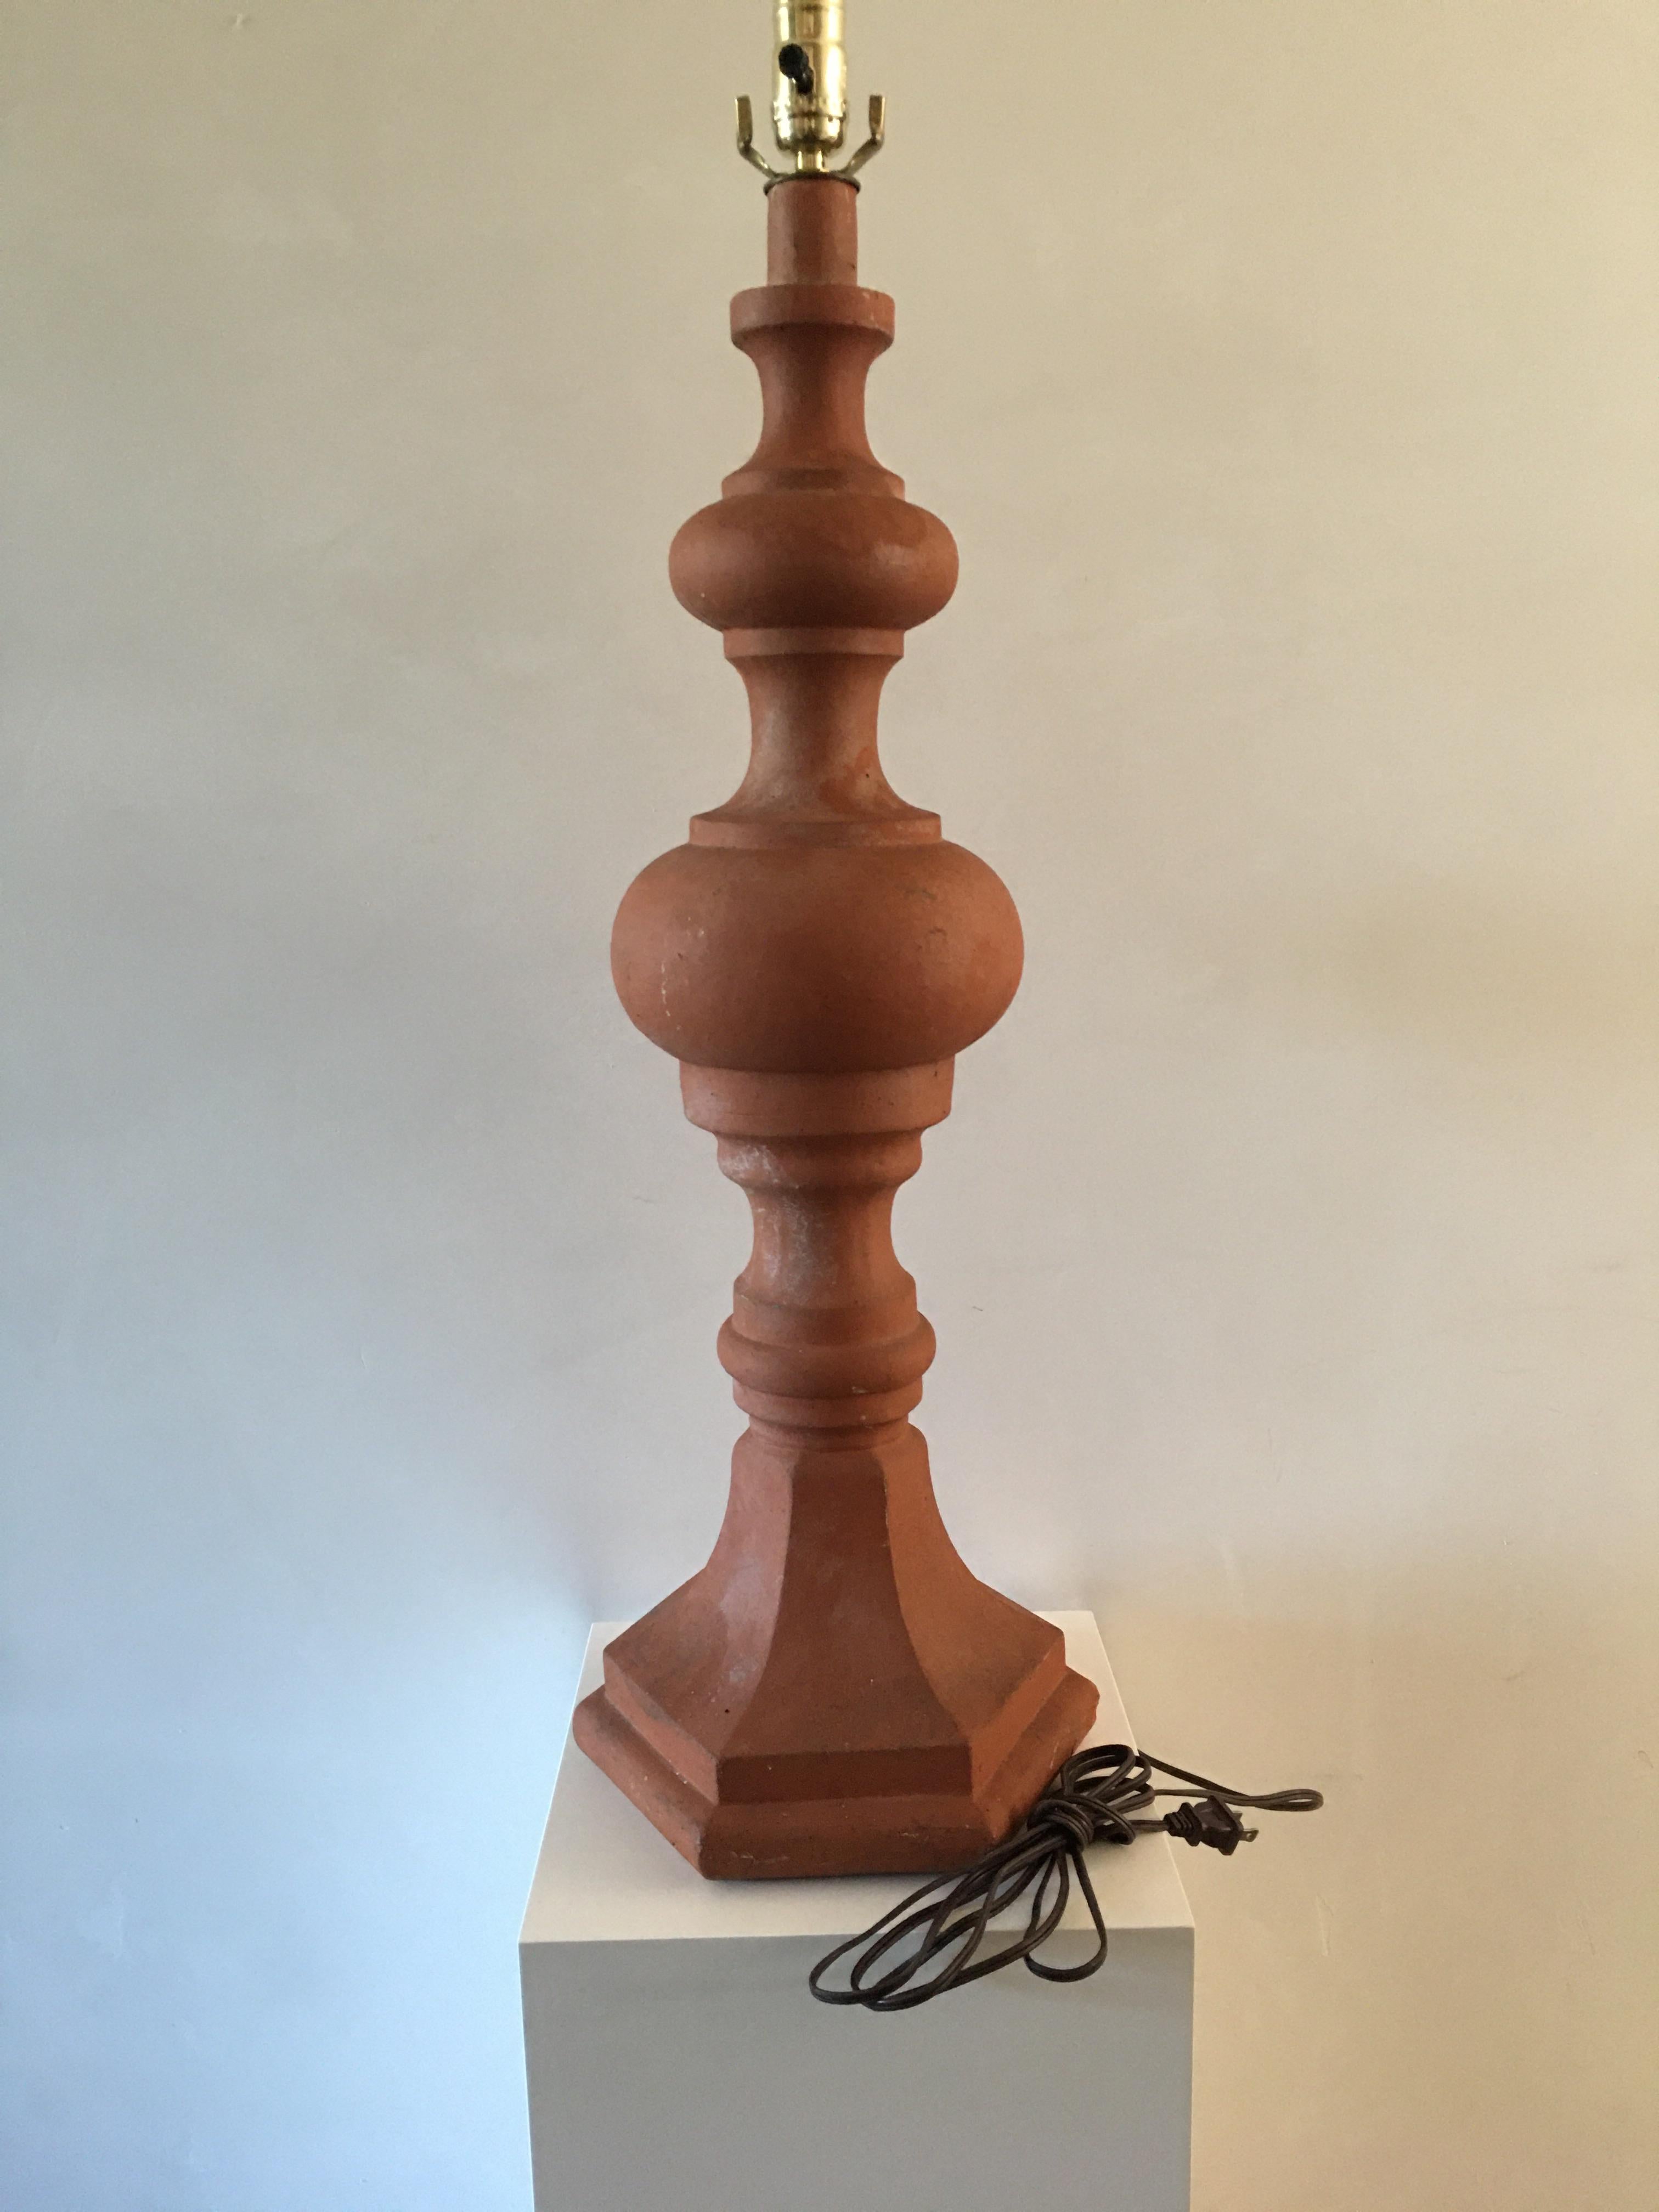 Large ornamental French terra cotta chimney cap converted into tall lamp. It is newly wired for US electrical requirements. It has a three way switch.  Shade is not included.